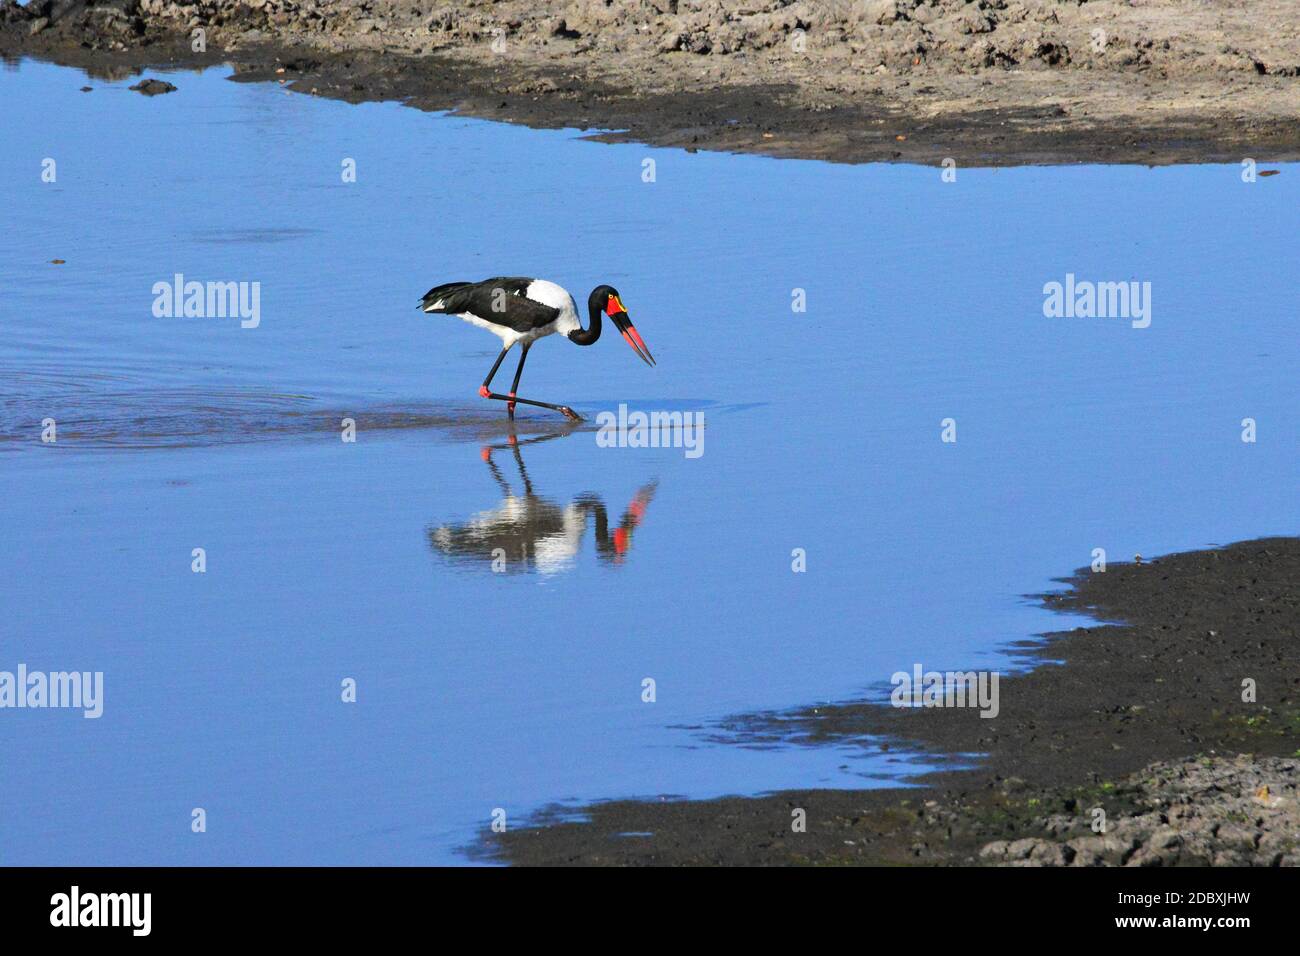 Saddle stork in the Kruger National Park in South Africa Stock Photo